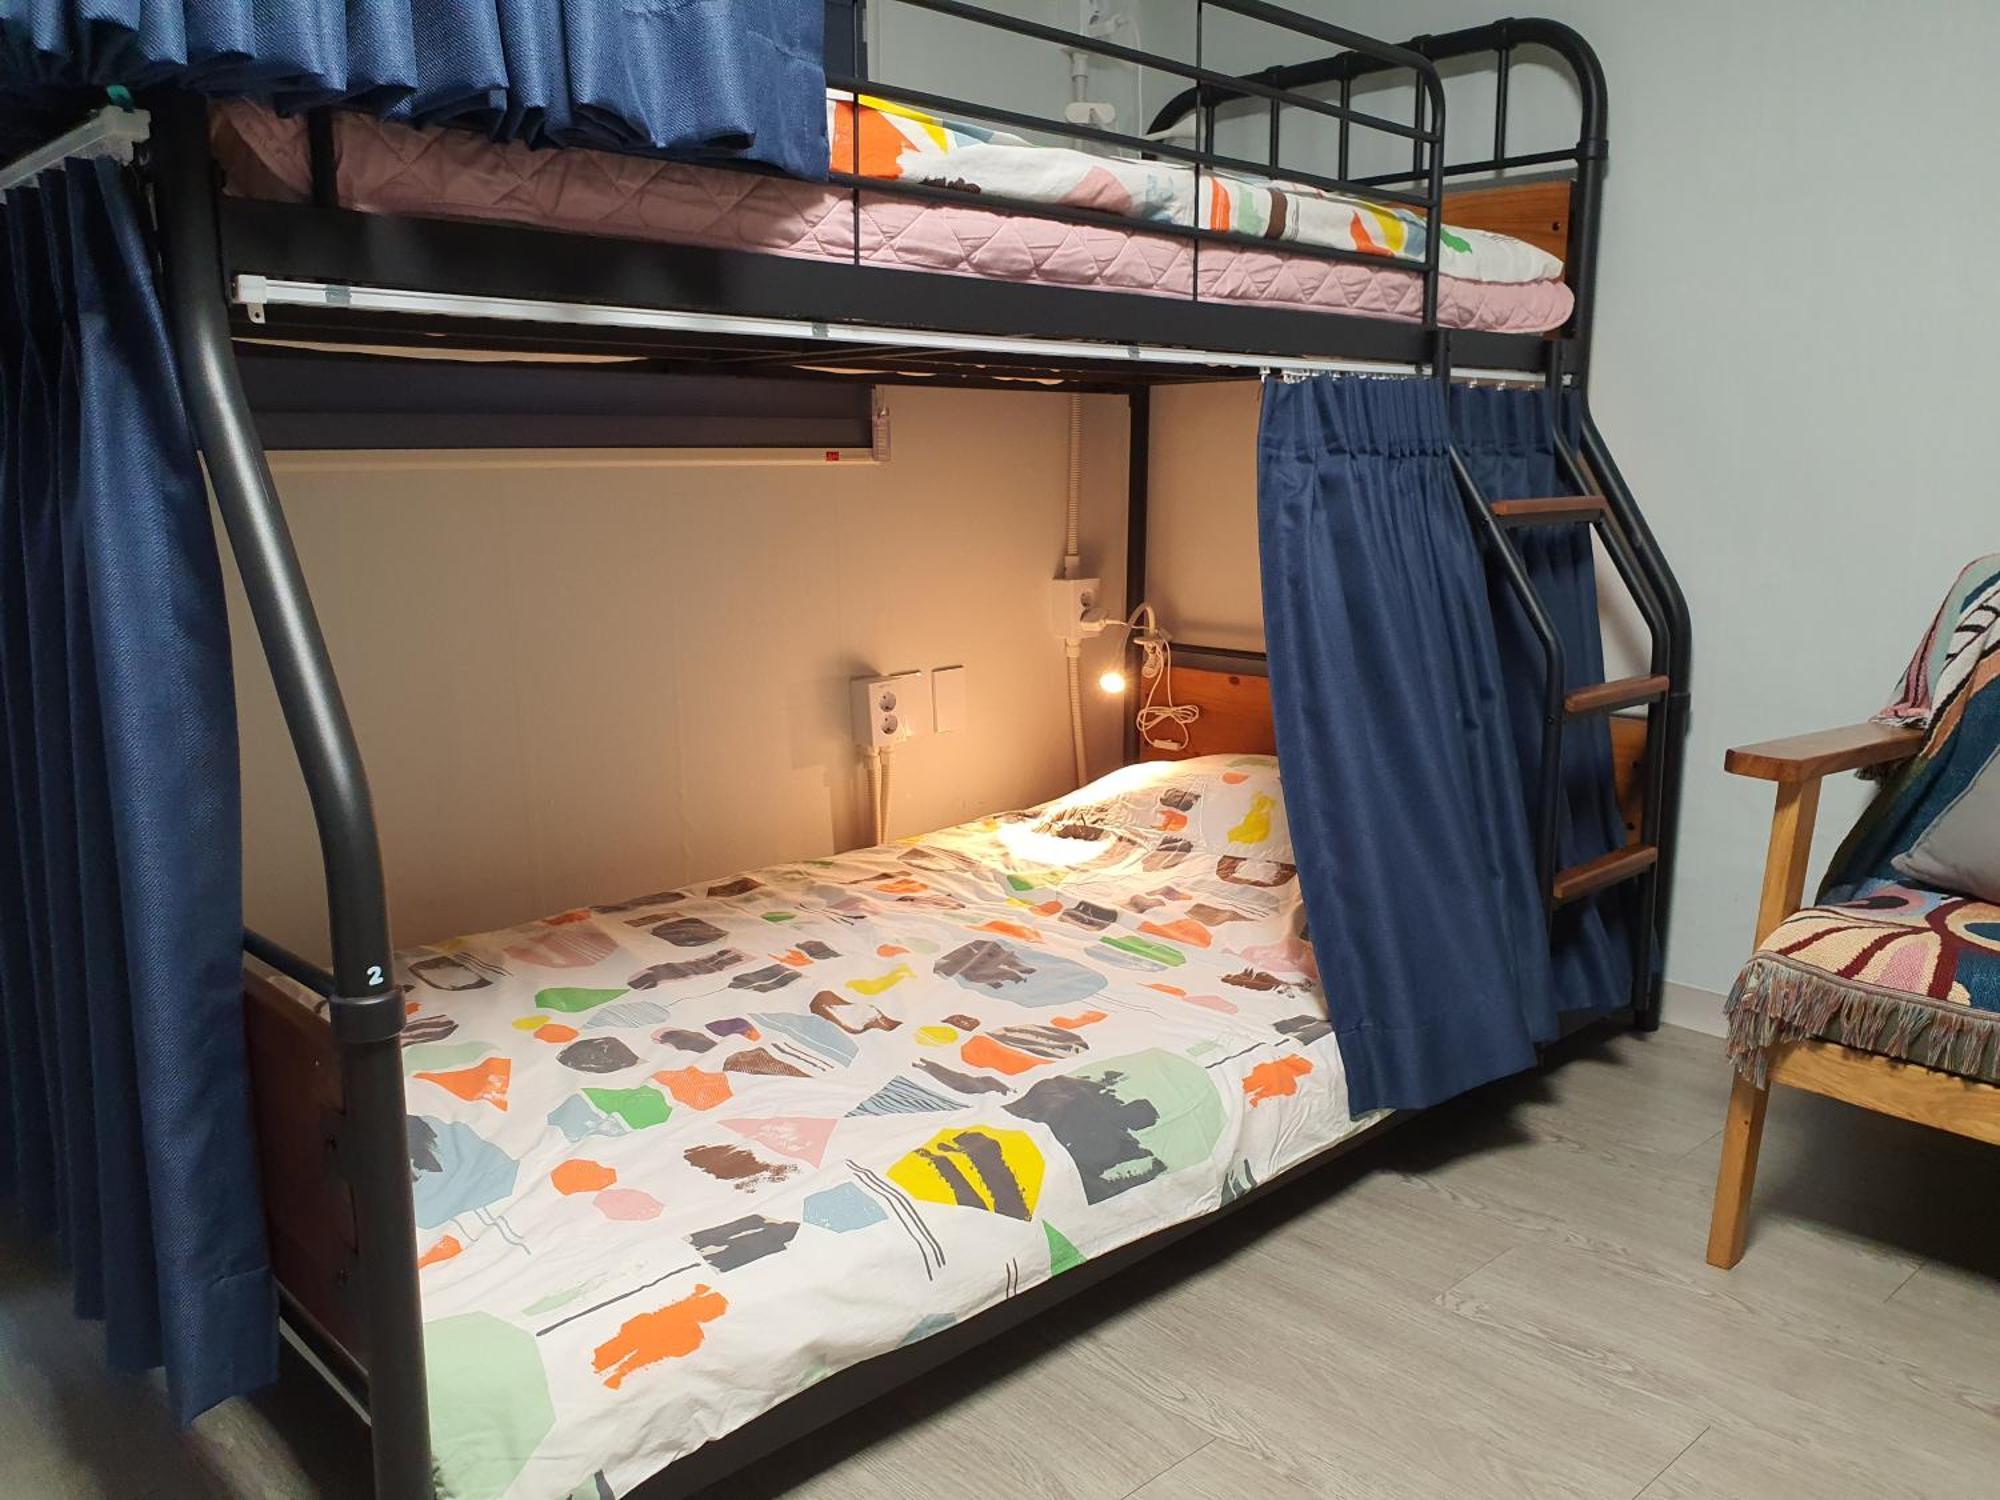 Bunk Backpackers Guesthouse Сеул Экстерьер фото